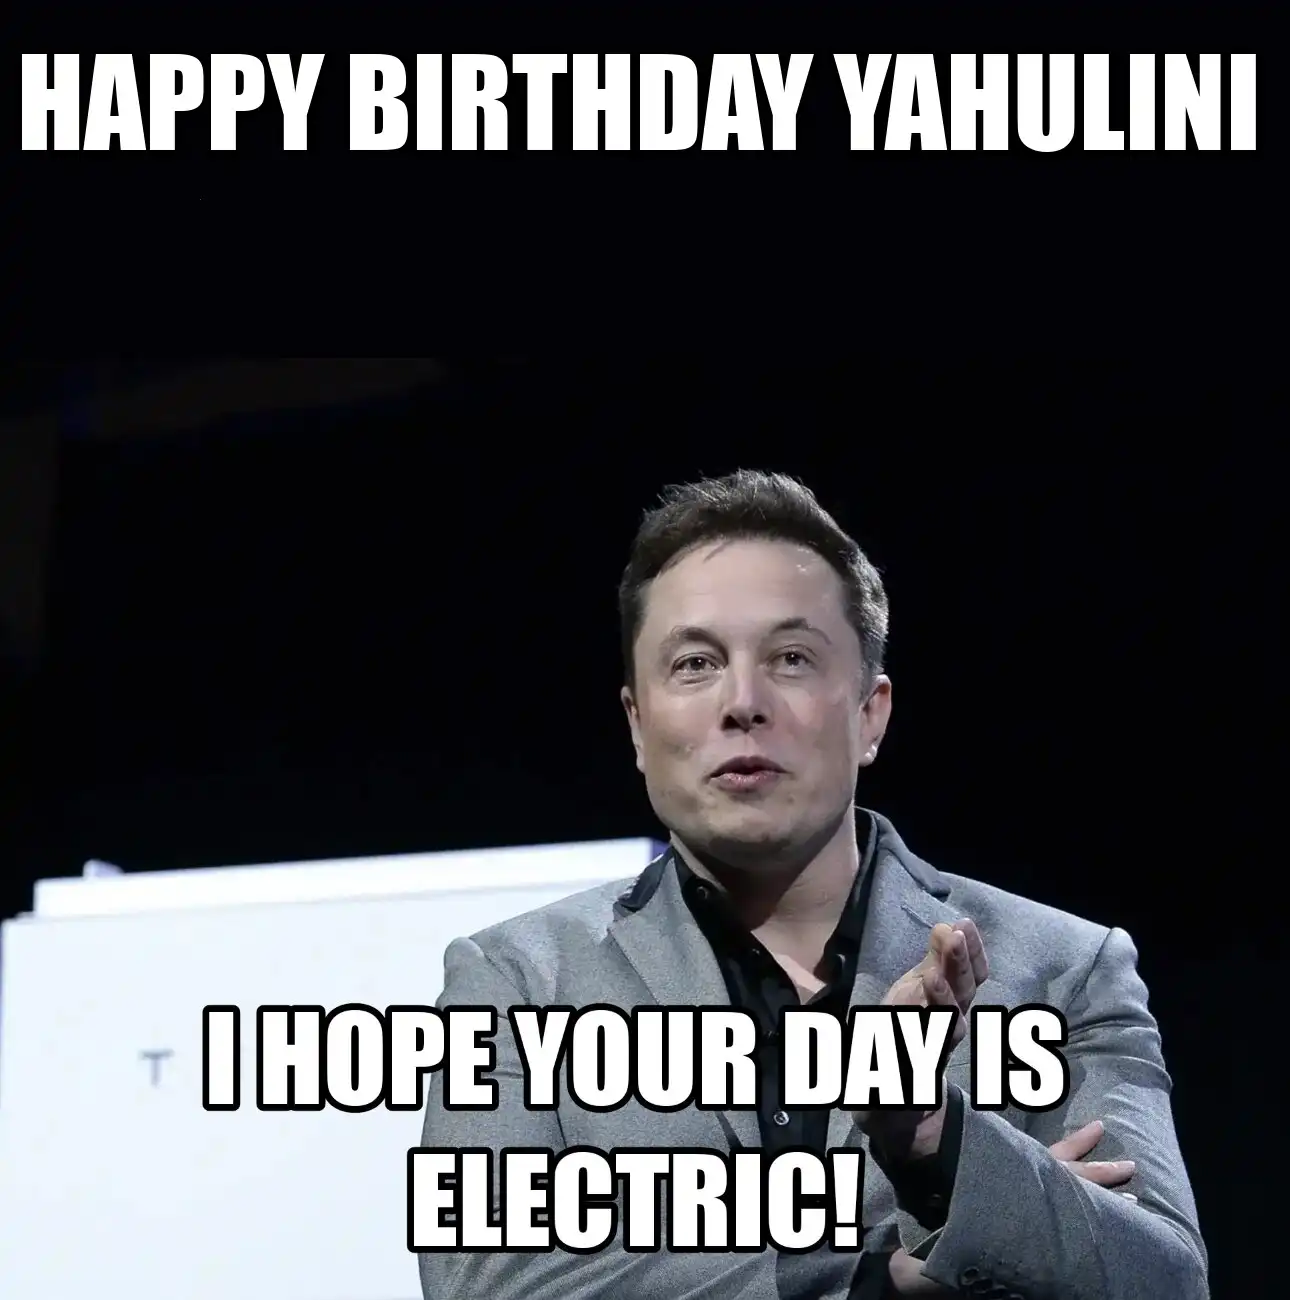 Happy Birthday Yahulini I Hope Your Day Is Electric Meme